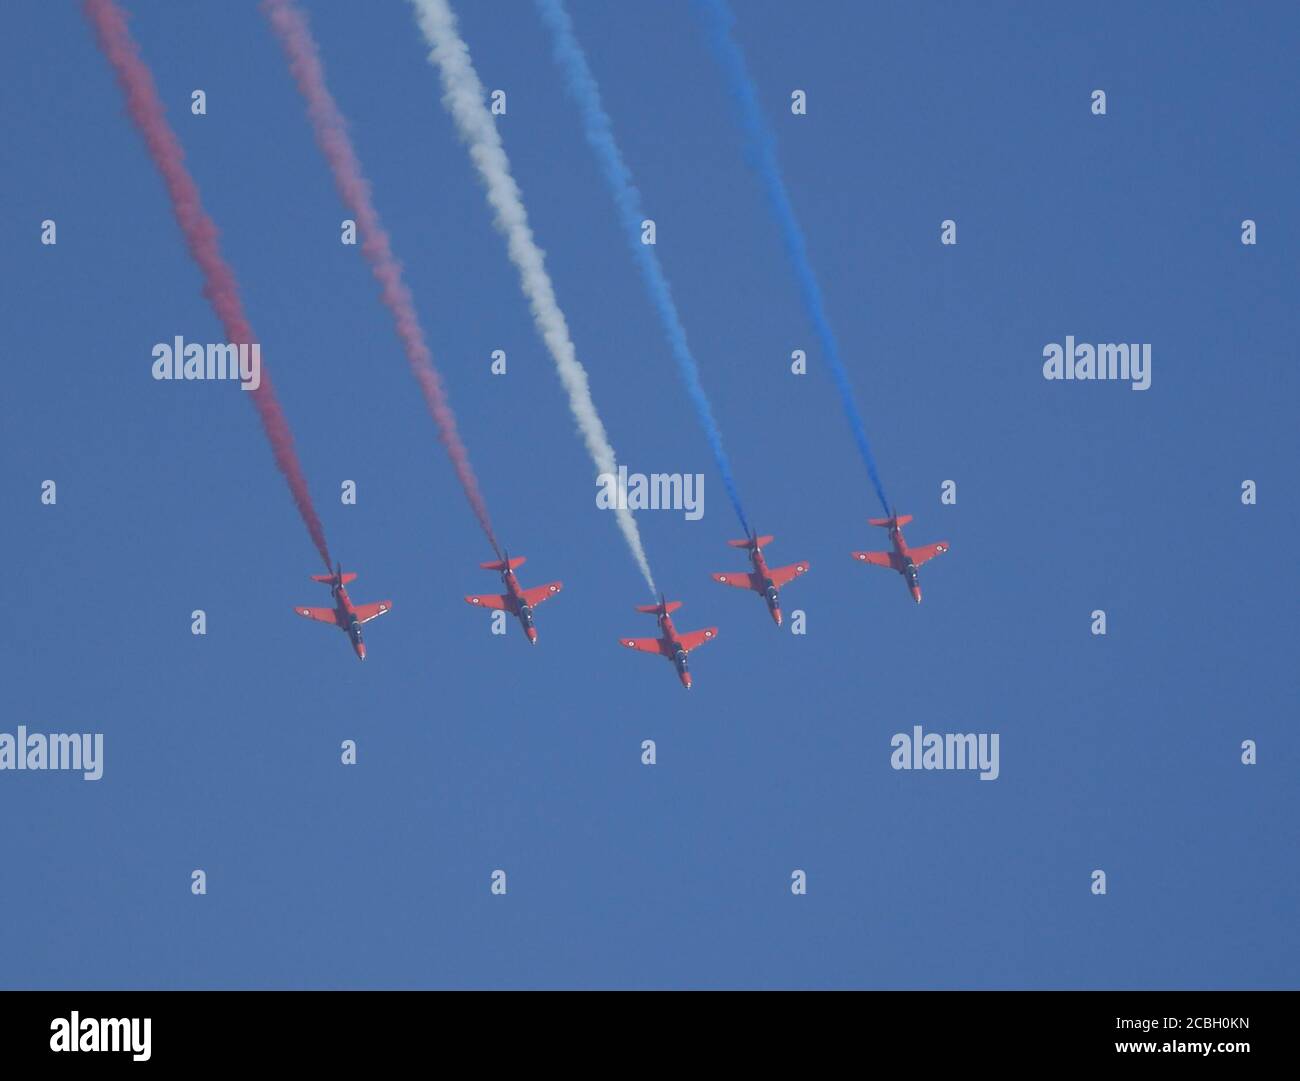 The world-famous Red Arrows aerobatics display team put on an incredible display over Anglesey today.  The team held a training rehearsal over RAF Valley in Anglesey, ahead of a number of fly-pasts this weekend for the Victory in Japan Day services. Credit Ian Fairbrother/Alamy Stock Photos Stock Photo